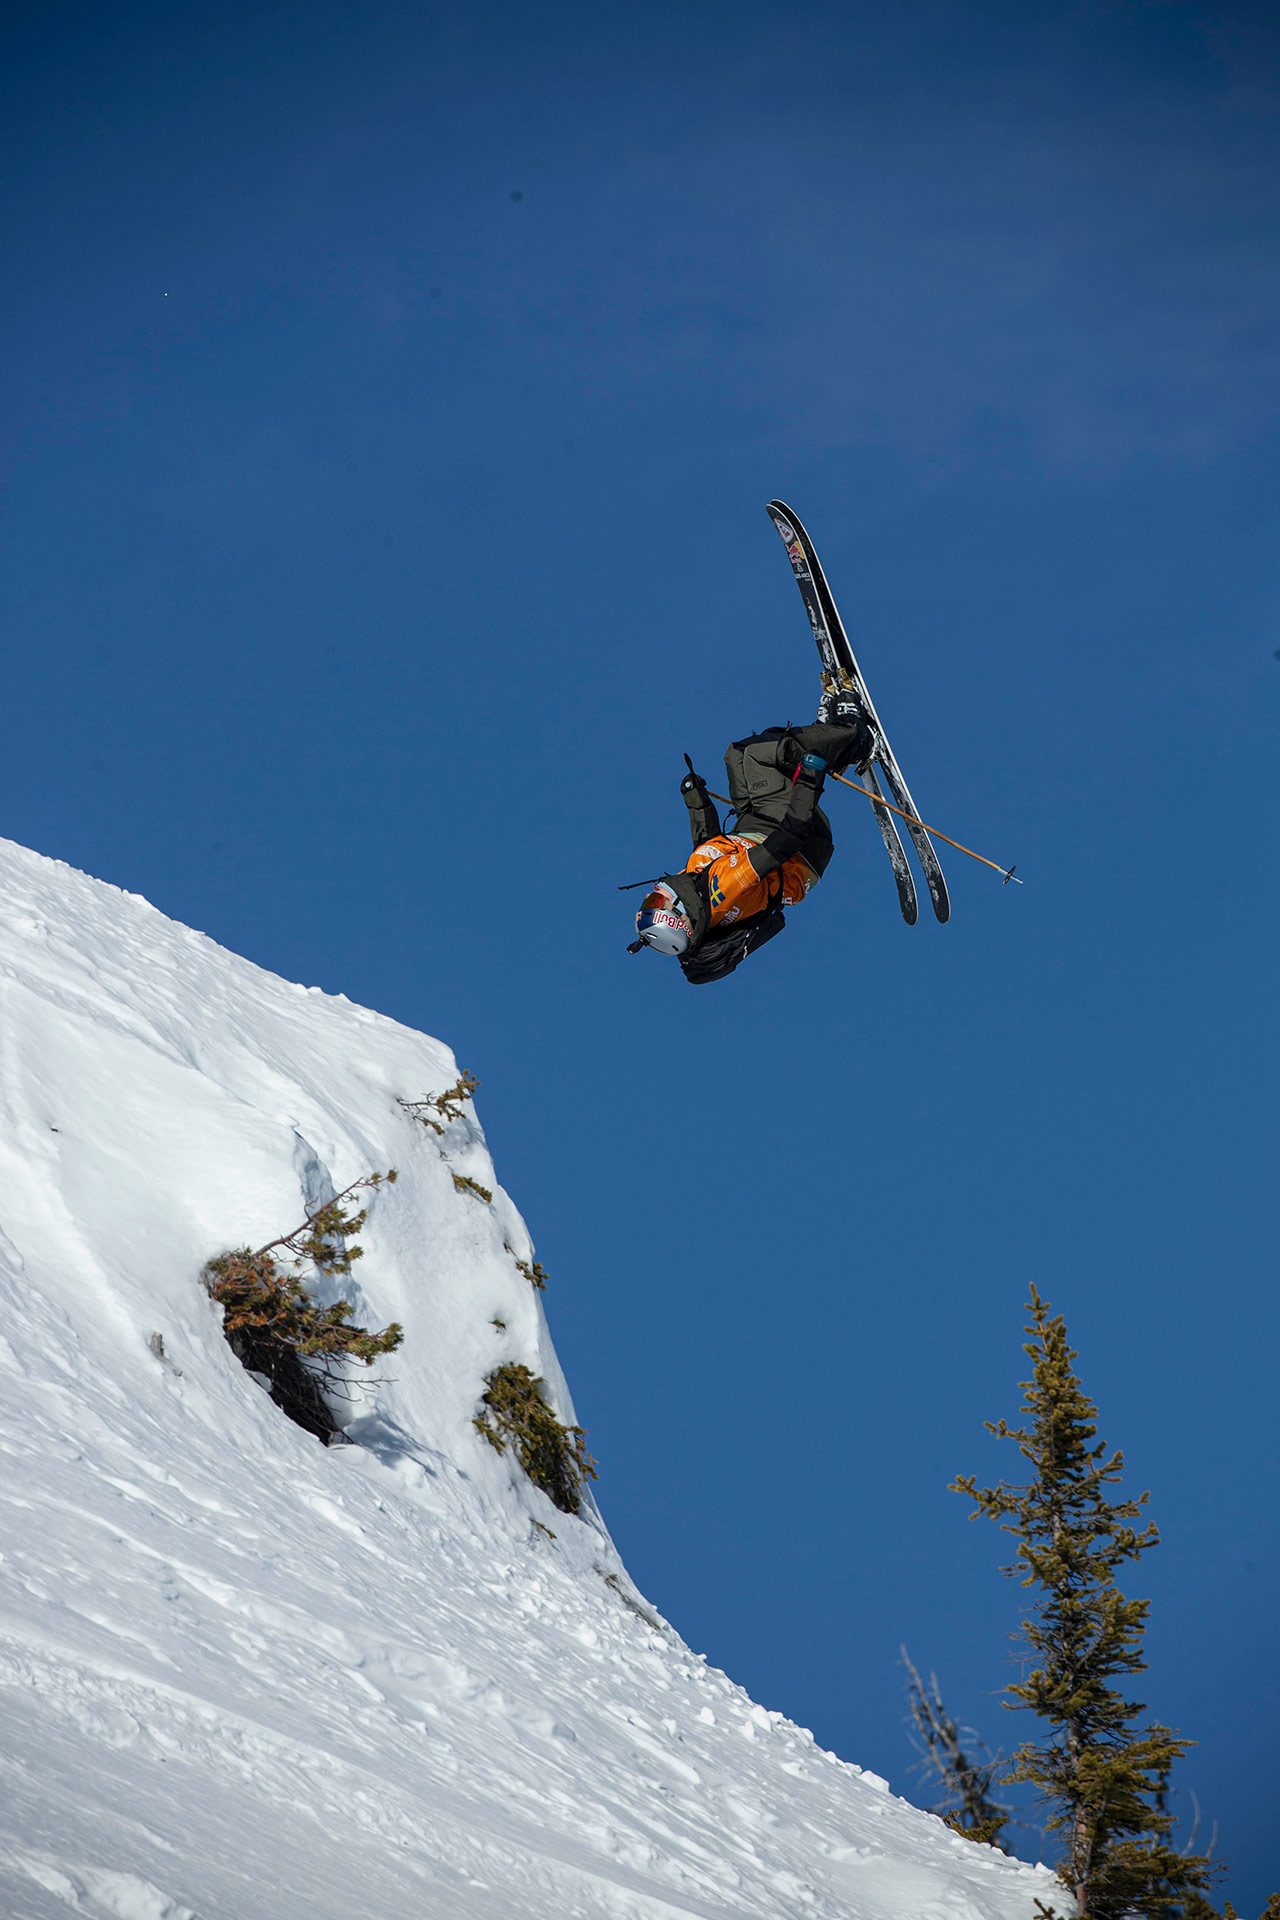 Max Palm at the 2022 Freeride World Tour stop in Kicking Horse, Canada